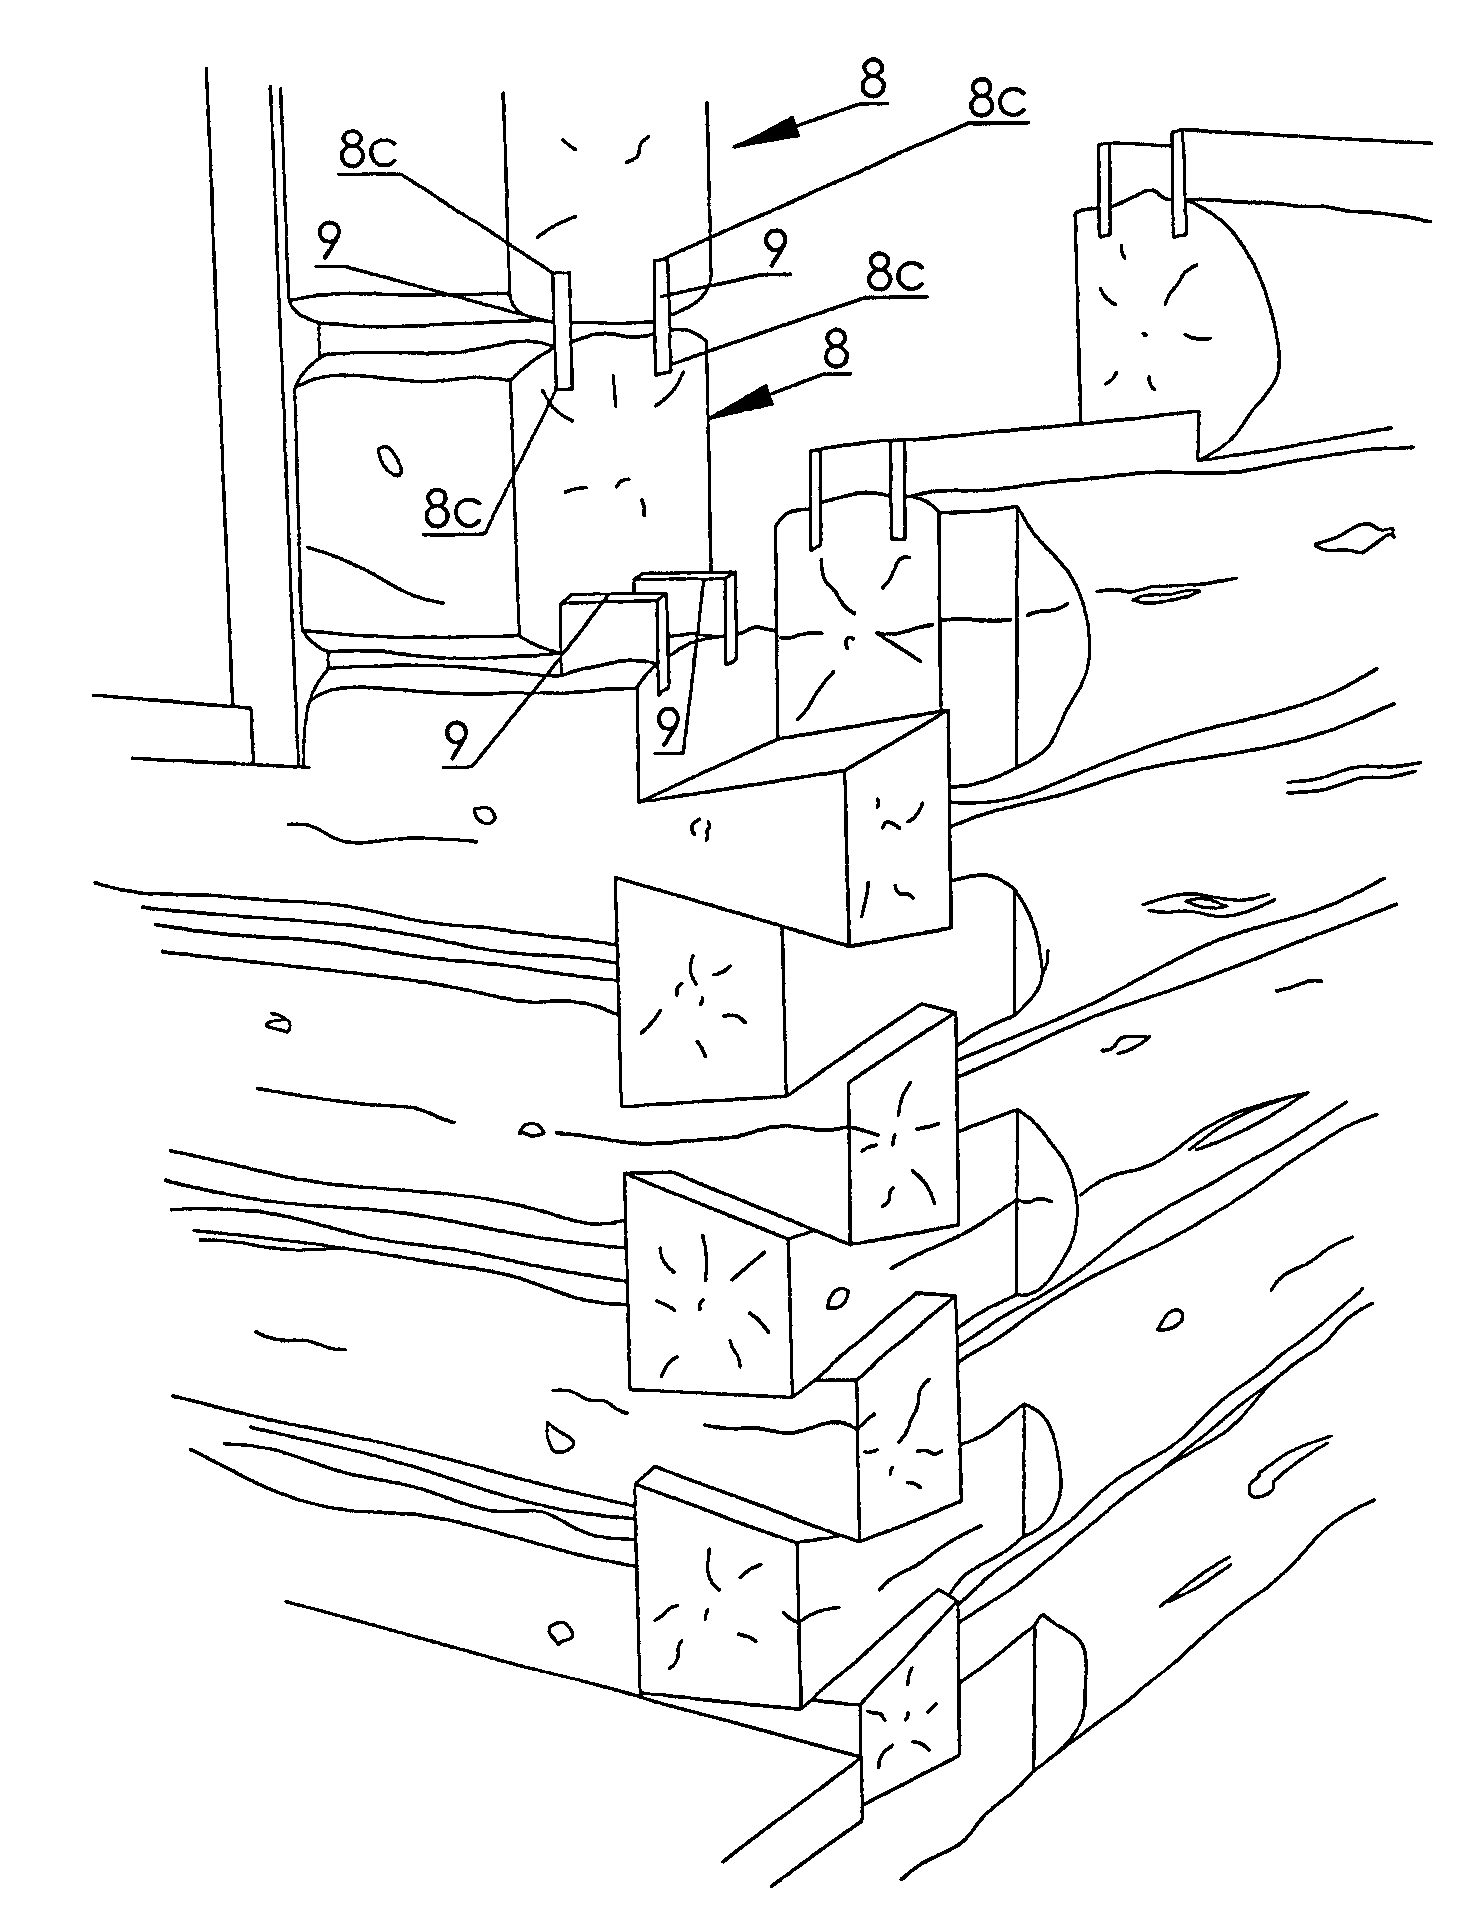 Method and apparatus for profiling a log for use in building timber or log homes